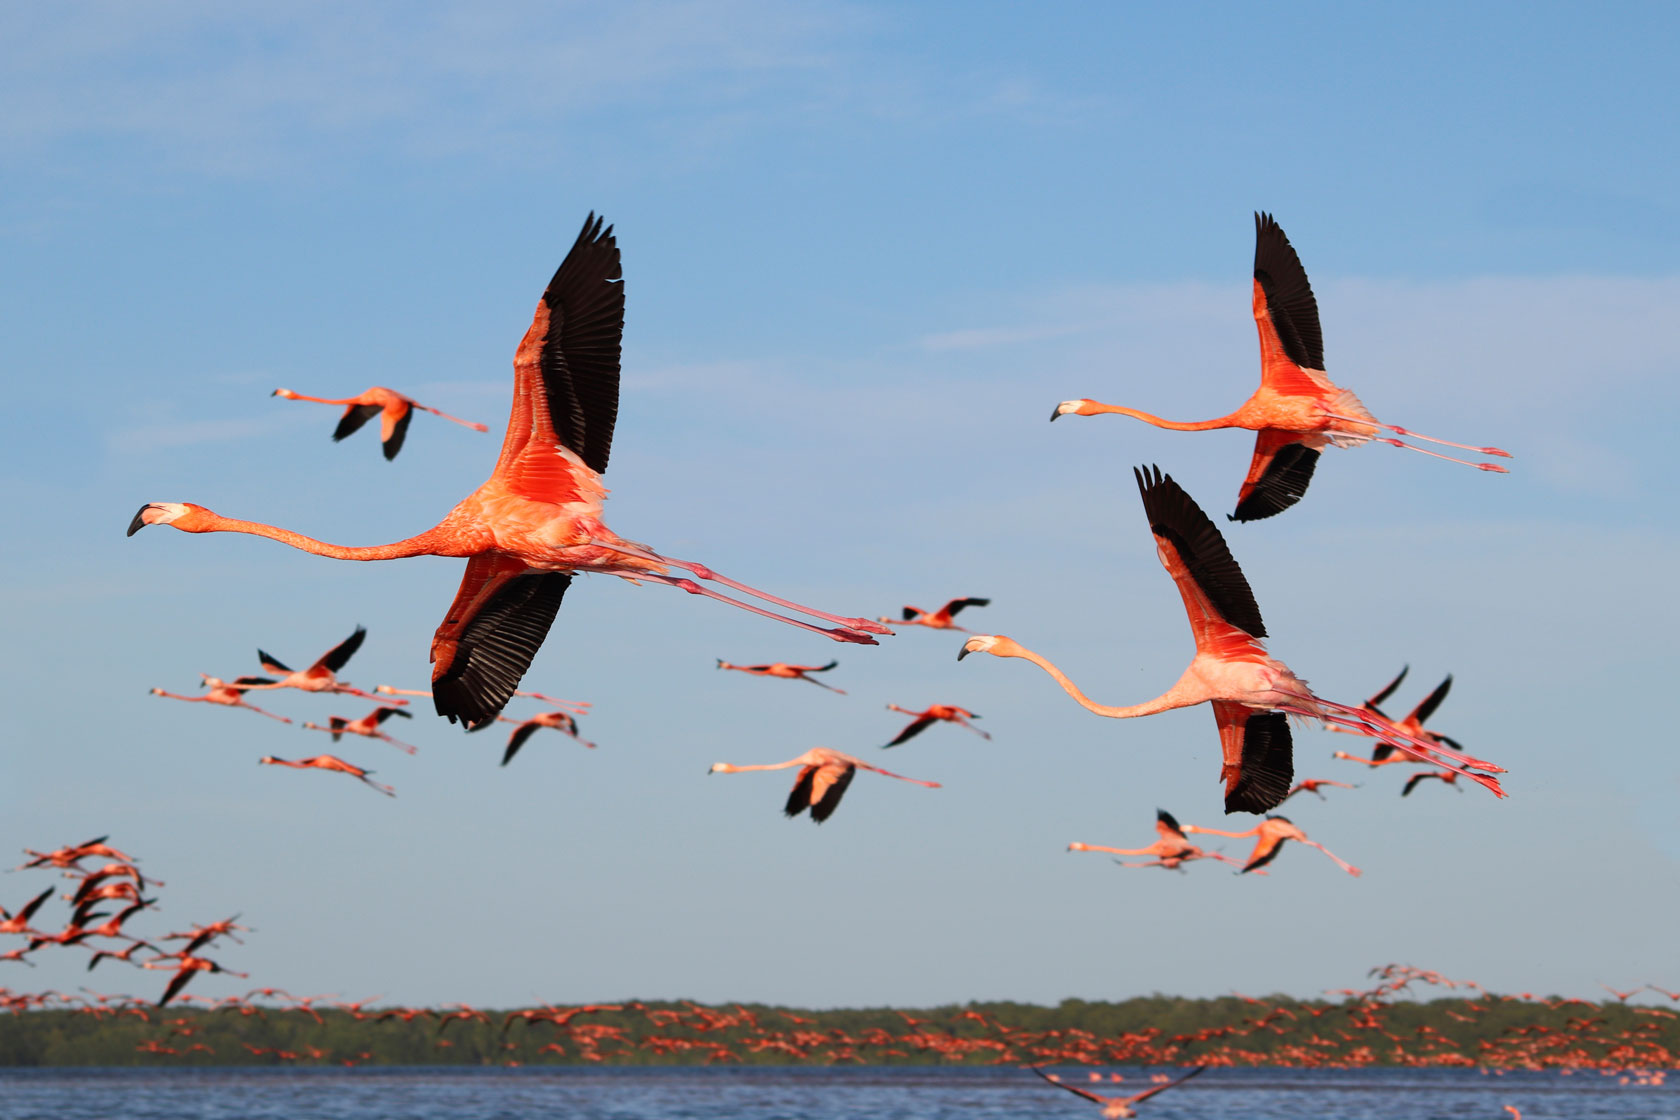 A flock of flying flamingos